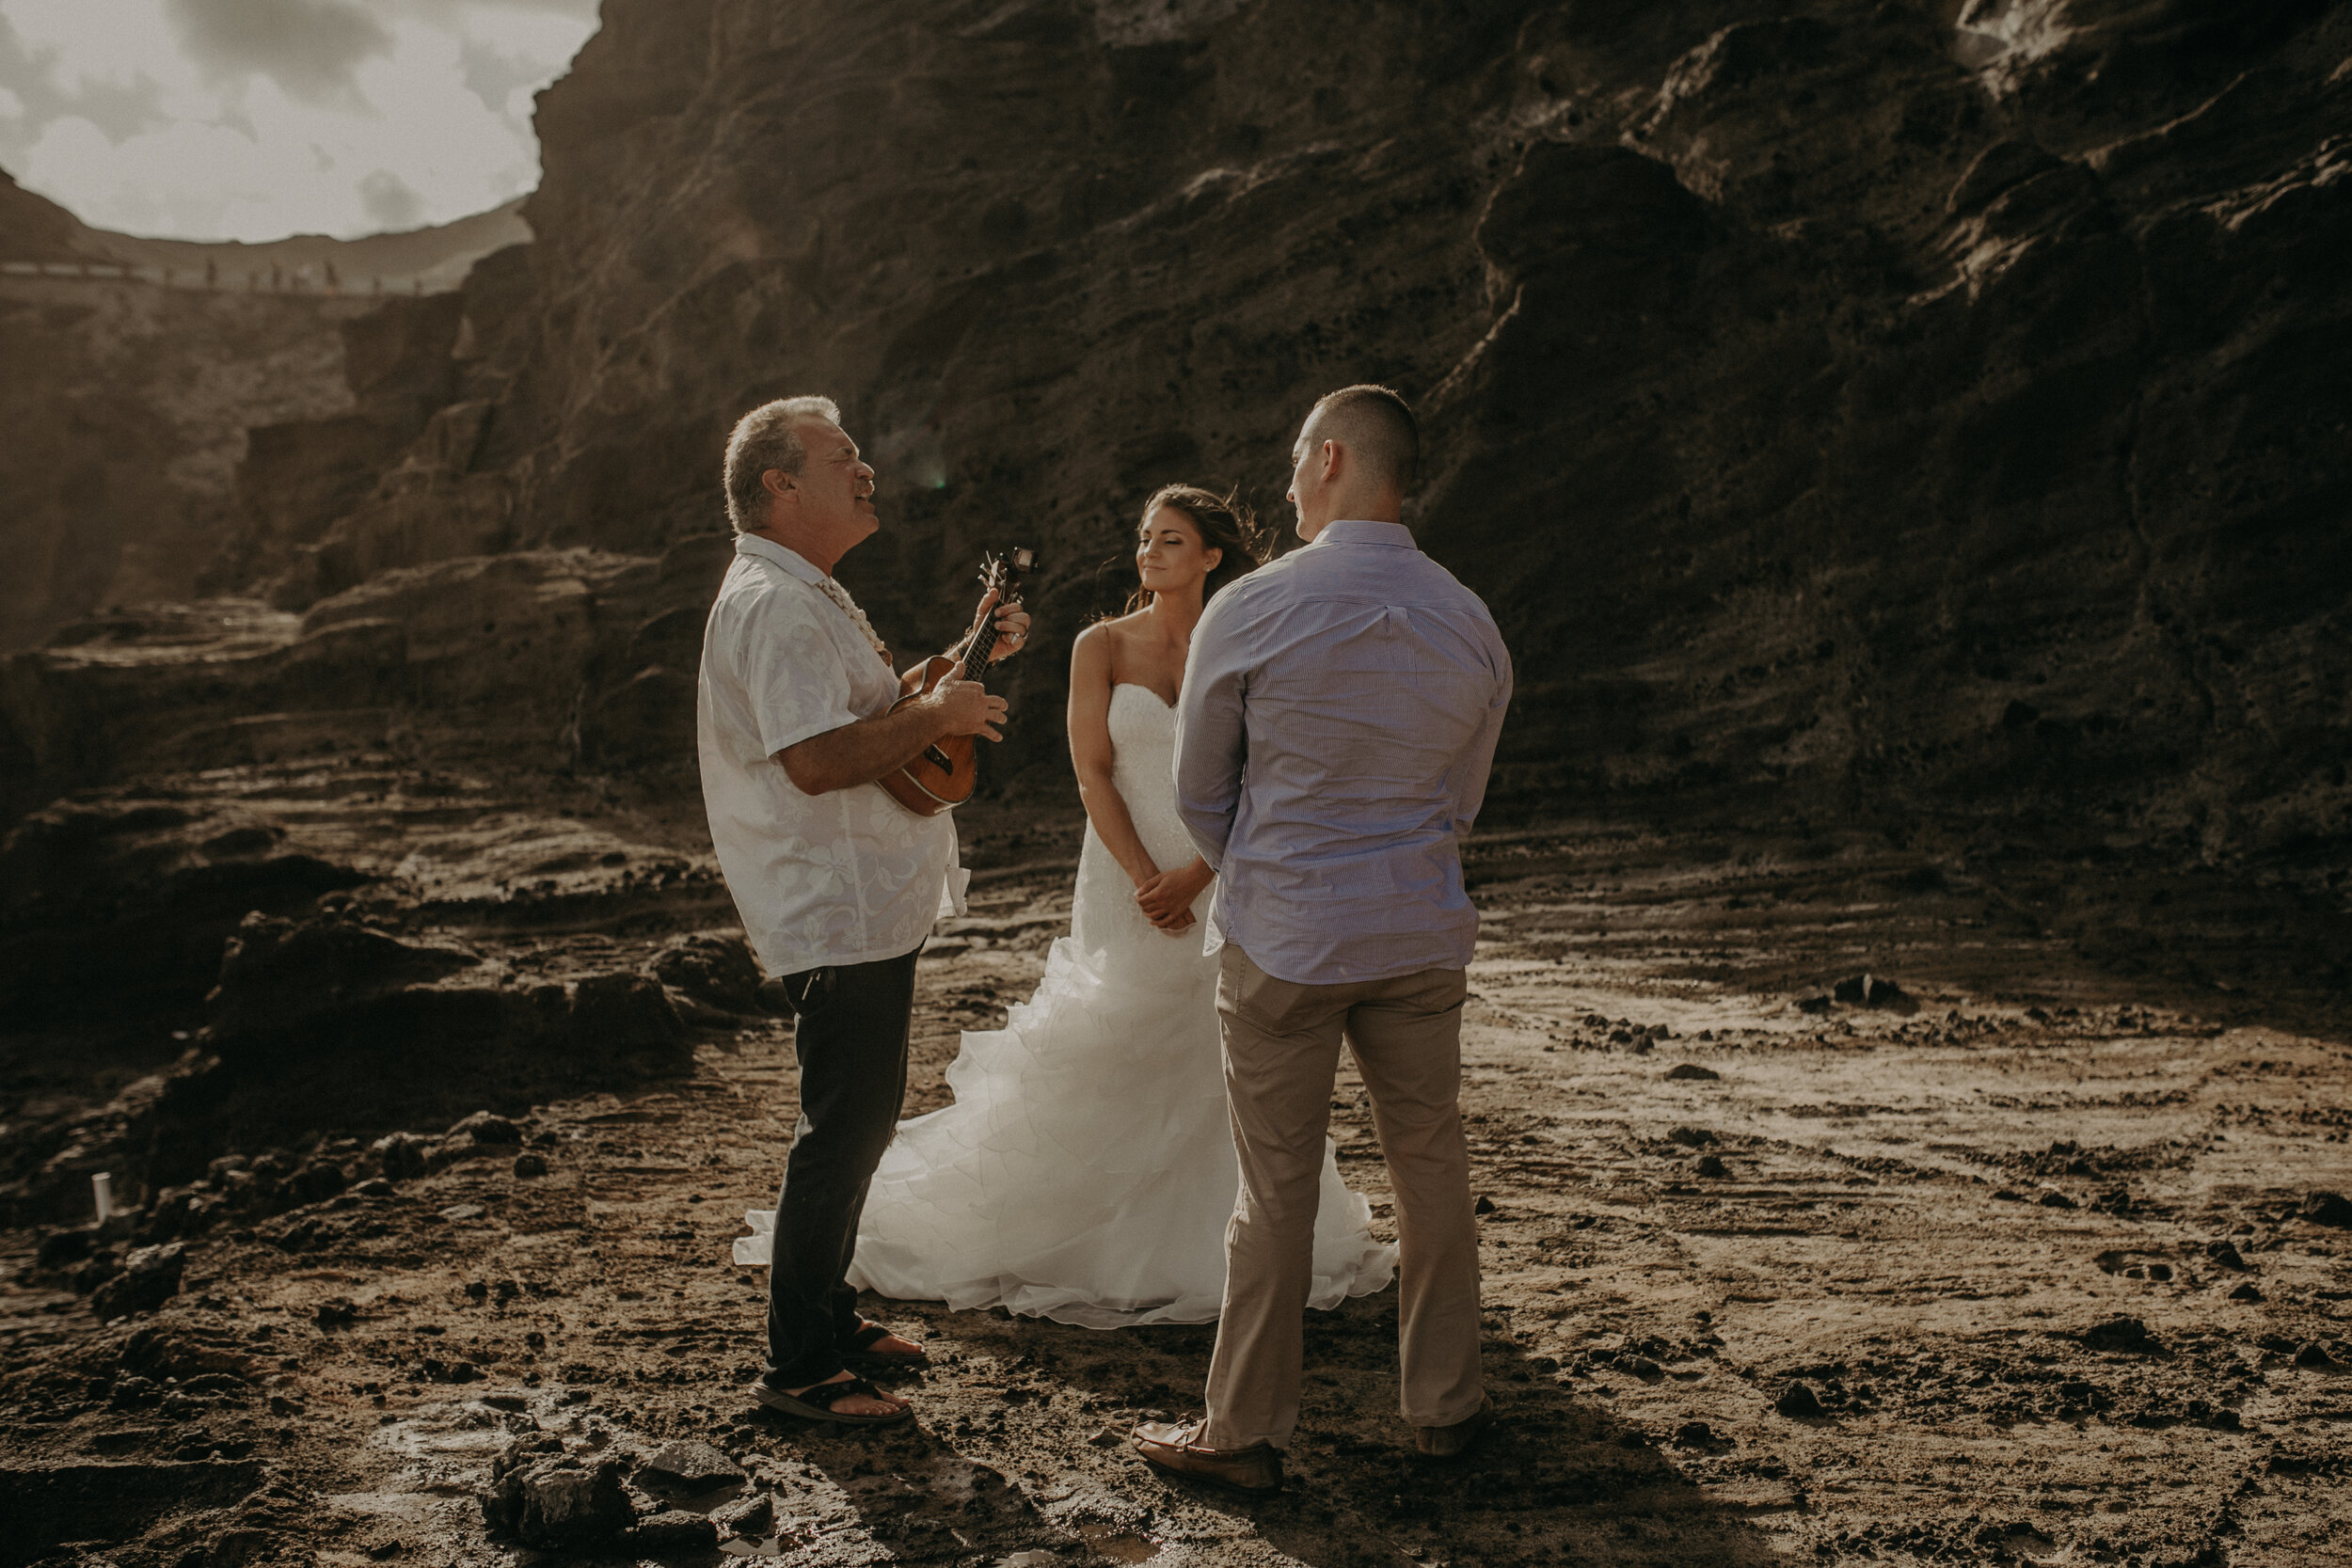  Oahu Elopement at Halona Blowhole in Hawaii #hawaiielopement #hawaiielopementphotographer #hawaiidestinationwedding #halonablowhole #halonablowholeelopement #oahuweddingphotographer #oahuelopementphotographer #oahuelopement #oahudestinationphotograp